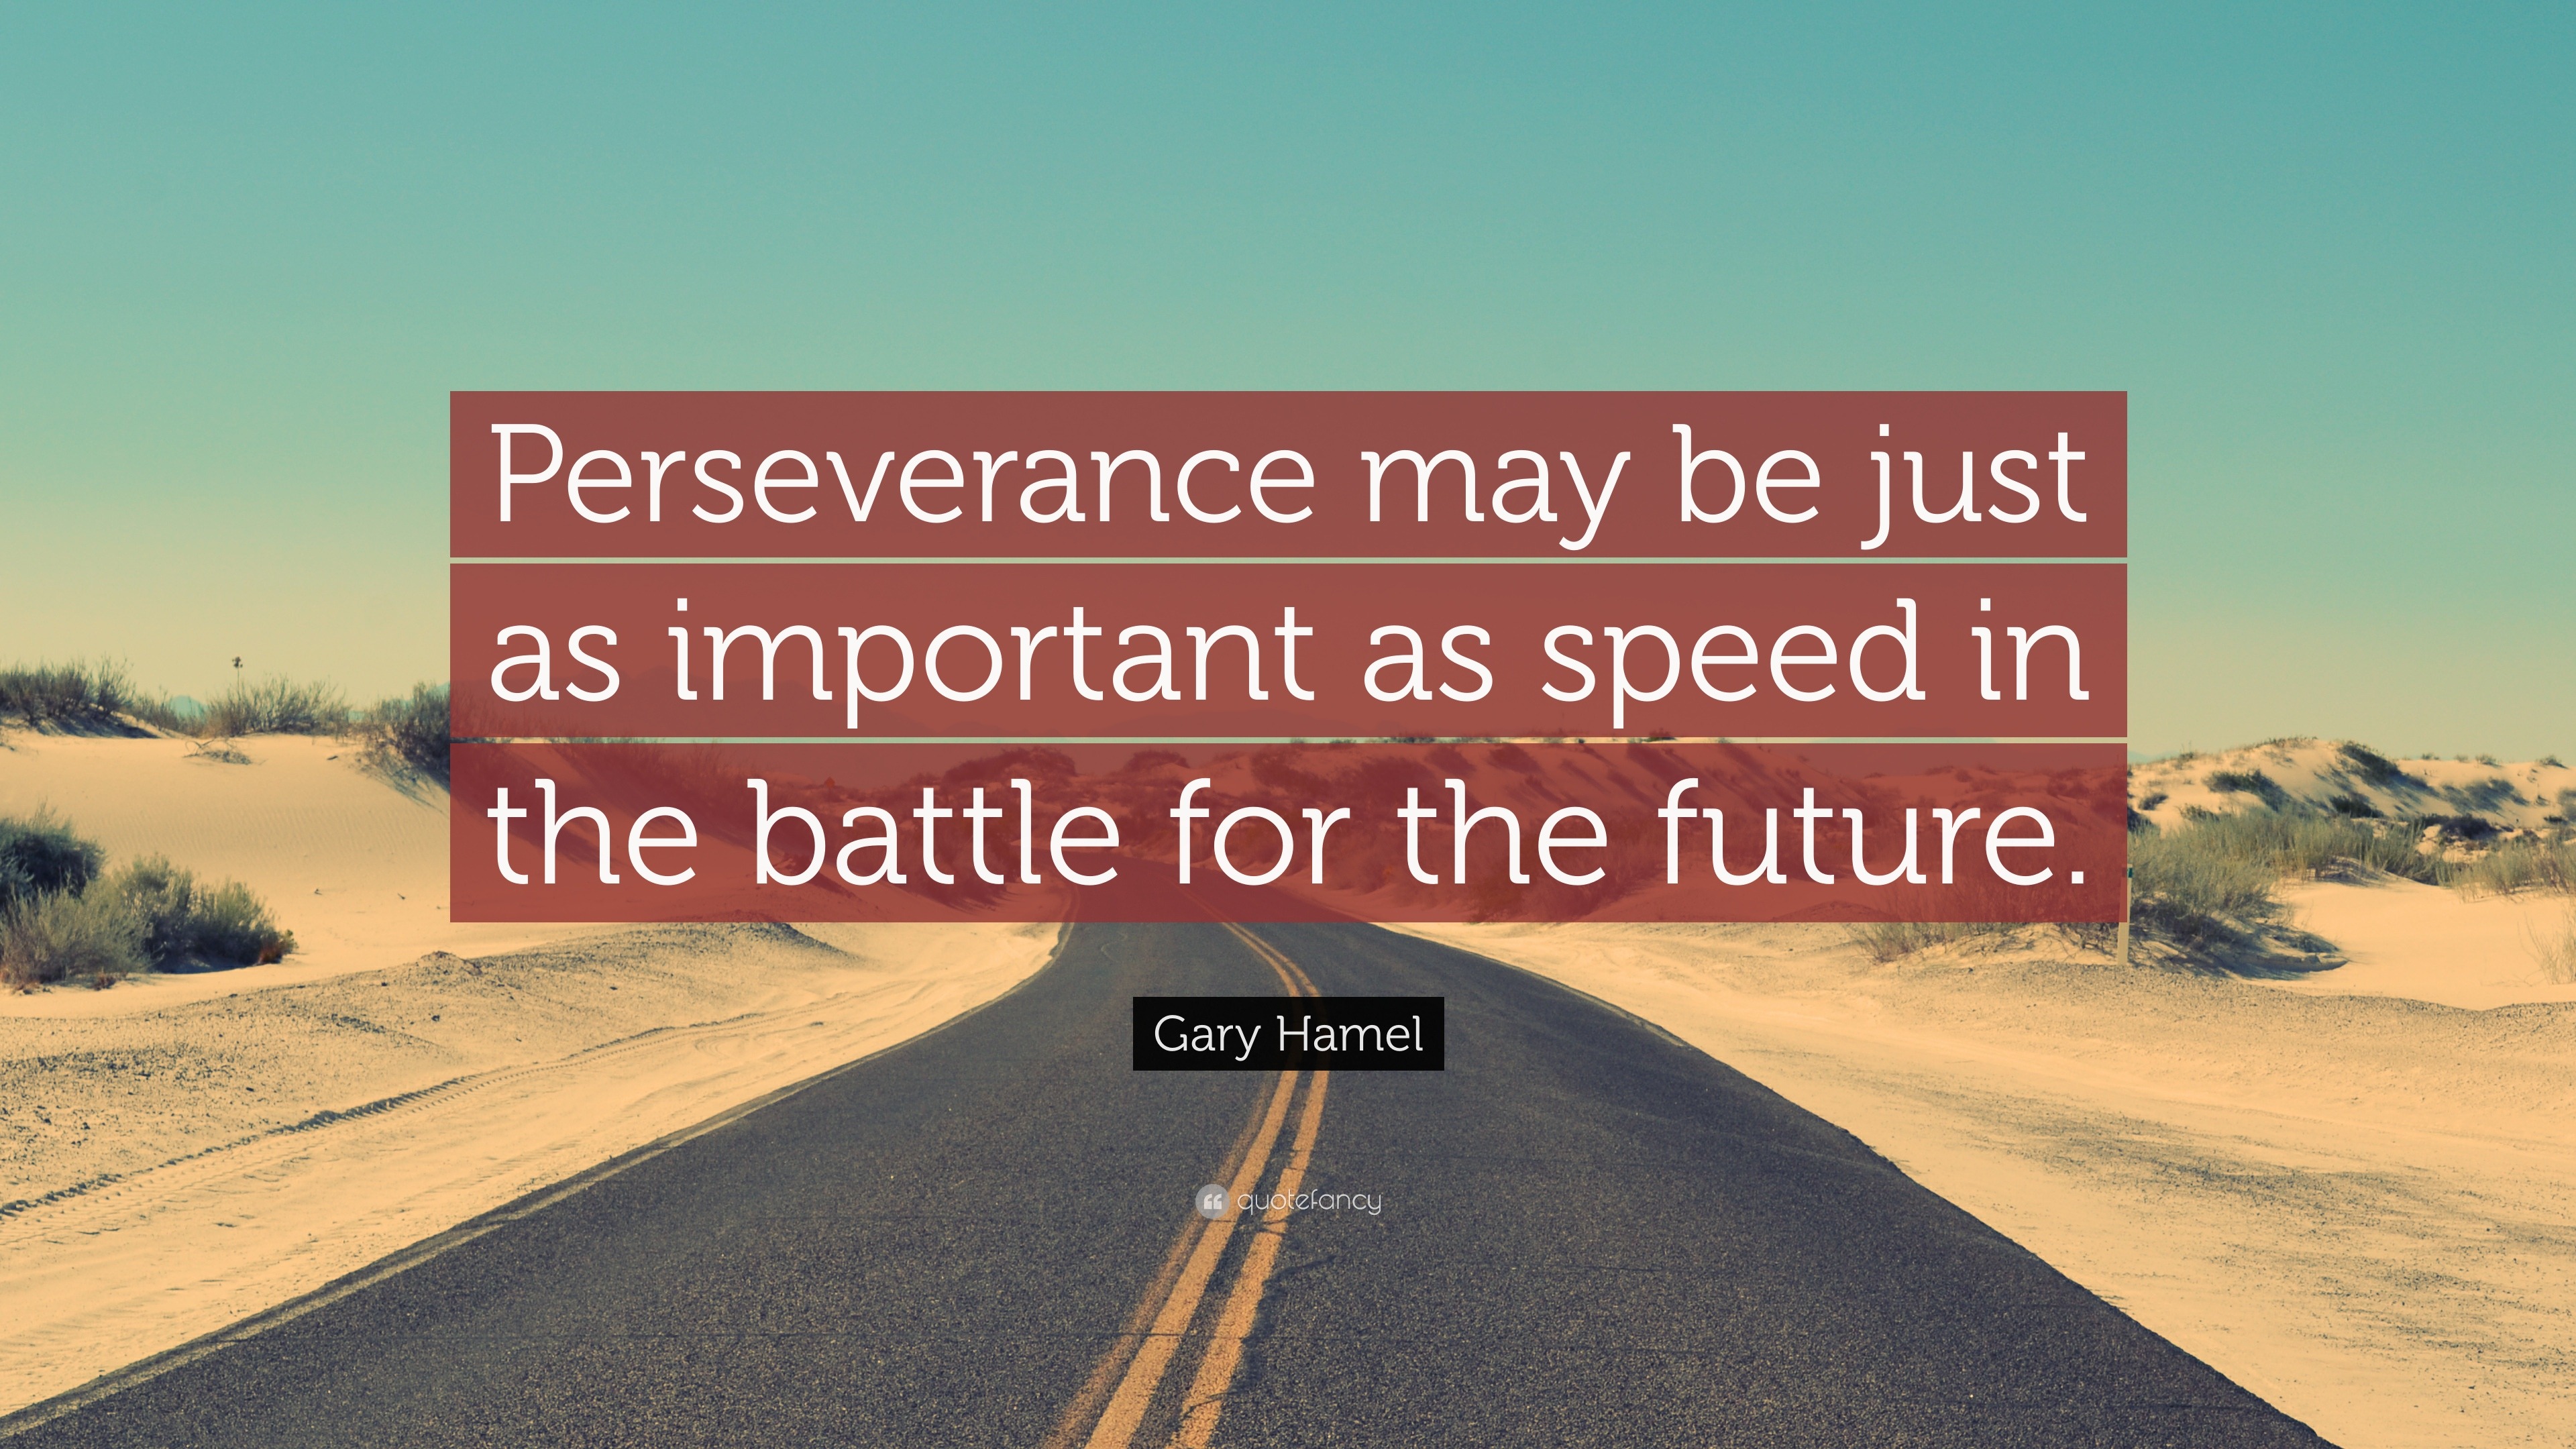 Gary Hamel Quote “perseverance May Be Just As Important As Speed In